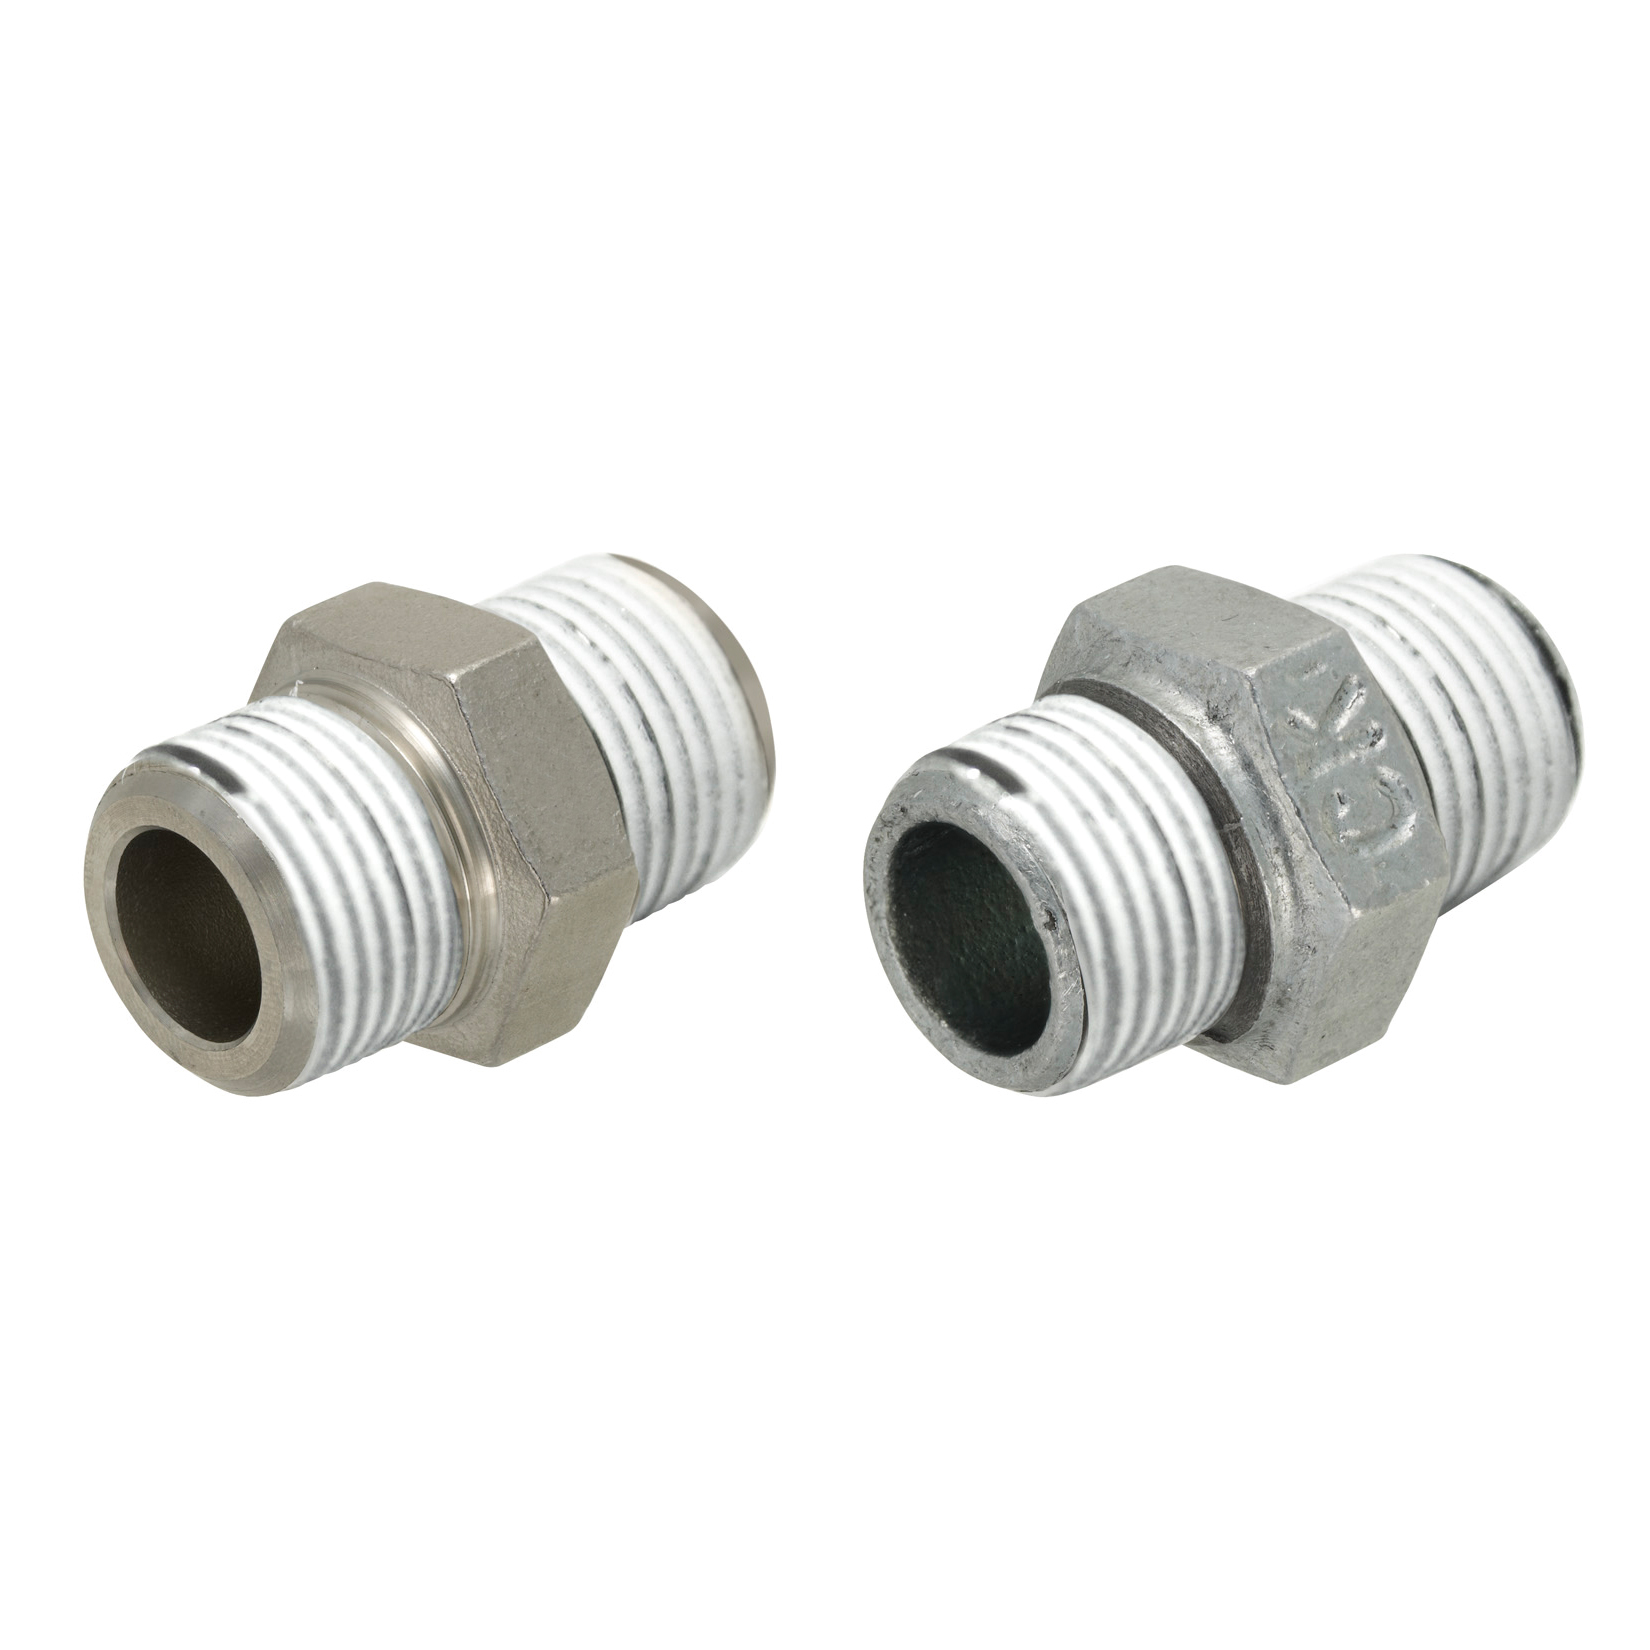 Low Pressure Fittings / With Seal Coating / Hexagon Nipple